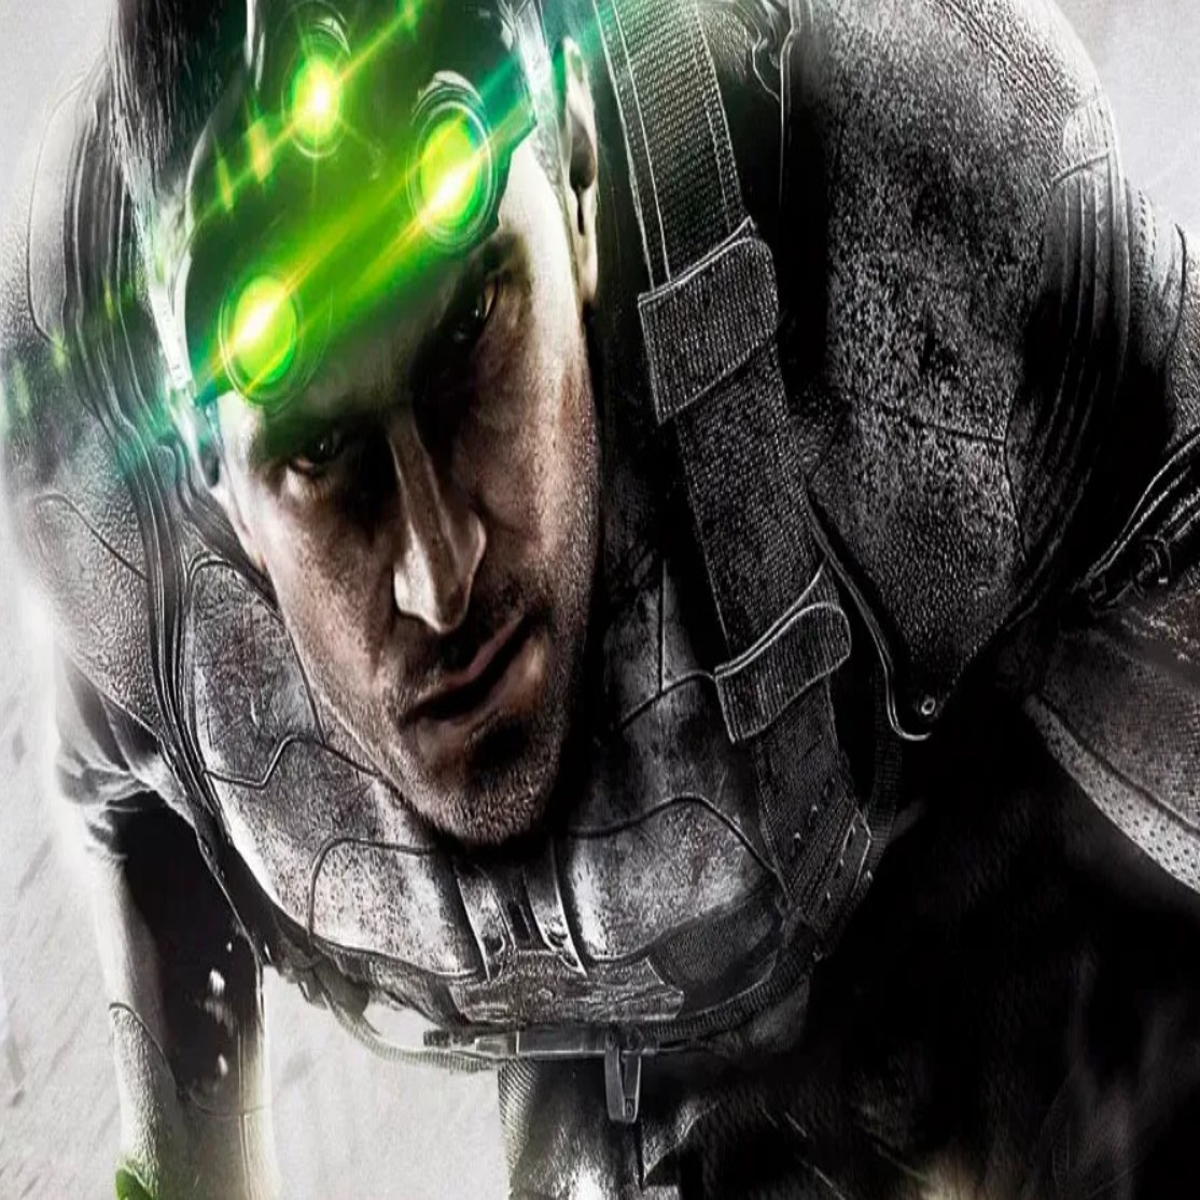 Steam Community :: Guide :: Improvements for Splinter Cell: Double Agent